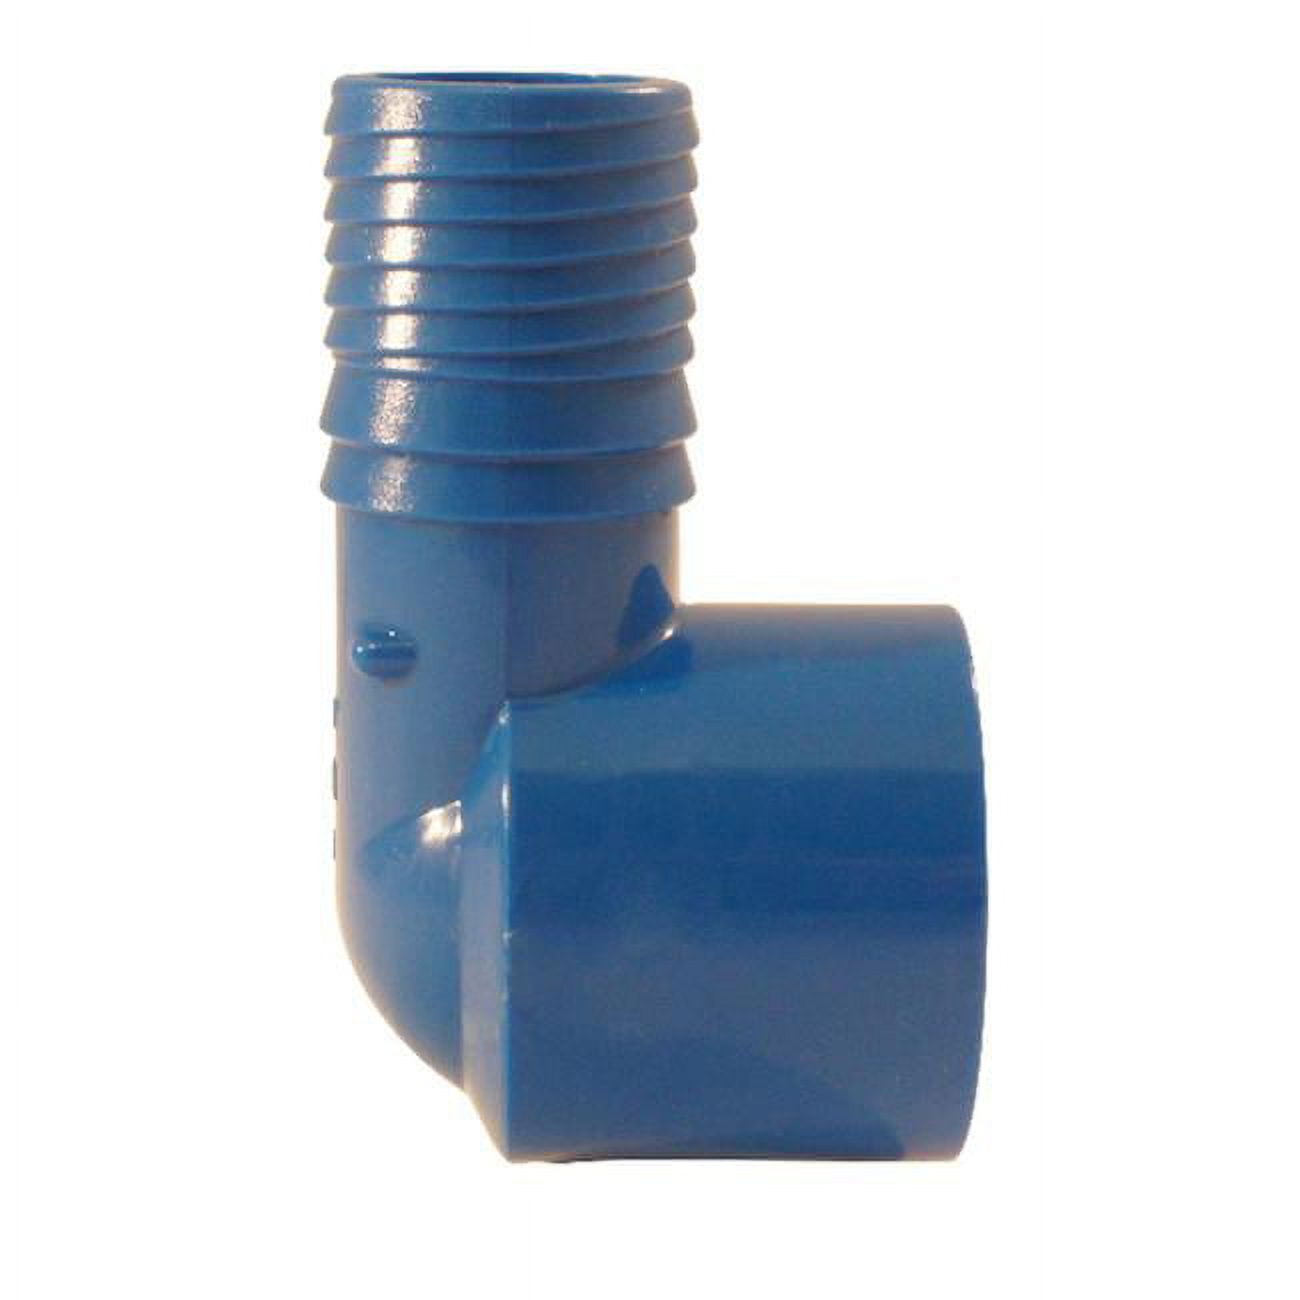 4814364 1 In. Insert X 1 In. Dia. Fpt Polypropylene Elbow, Blue